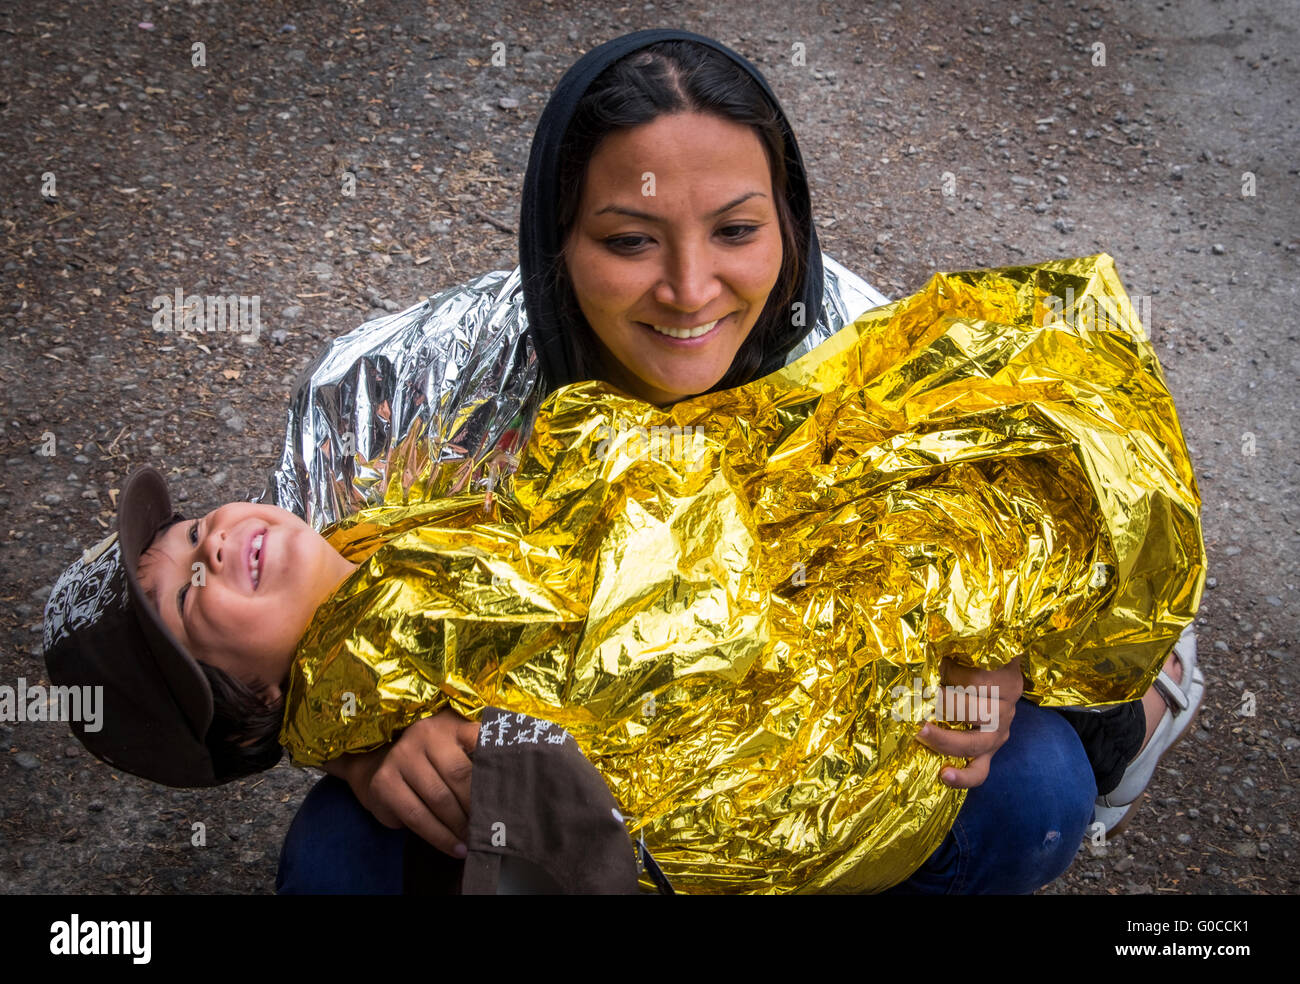 Afghani refugee mother and child wrap up in emergency blankets after getting wet crossing to Lesvos from Turkey in a raft Stock Photo